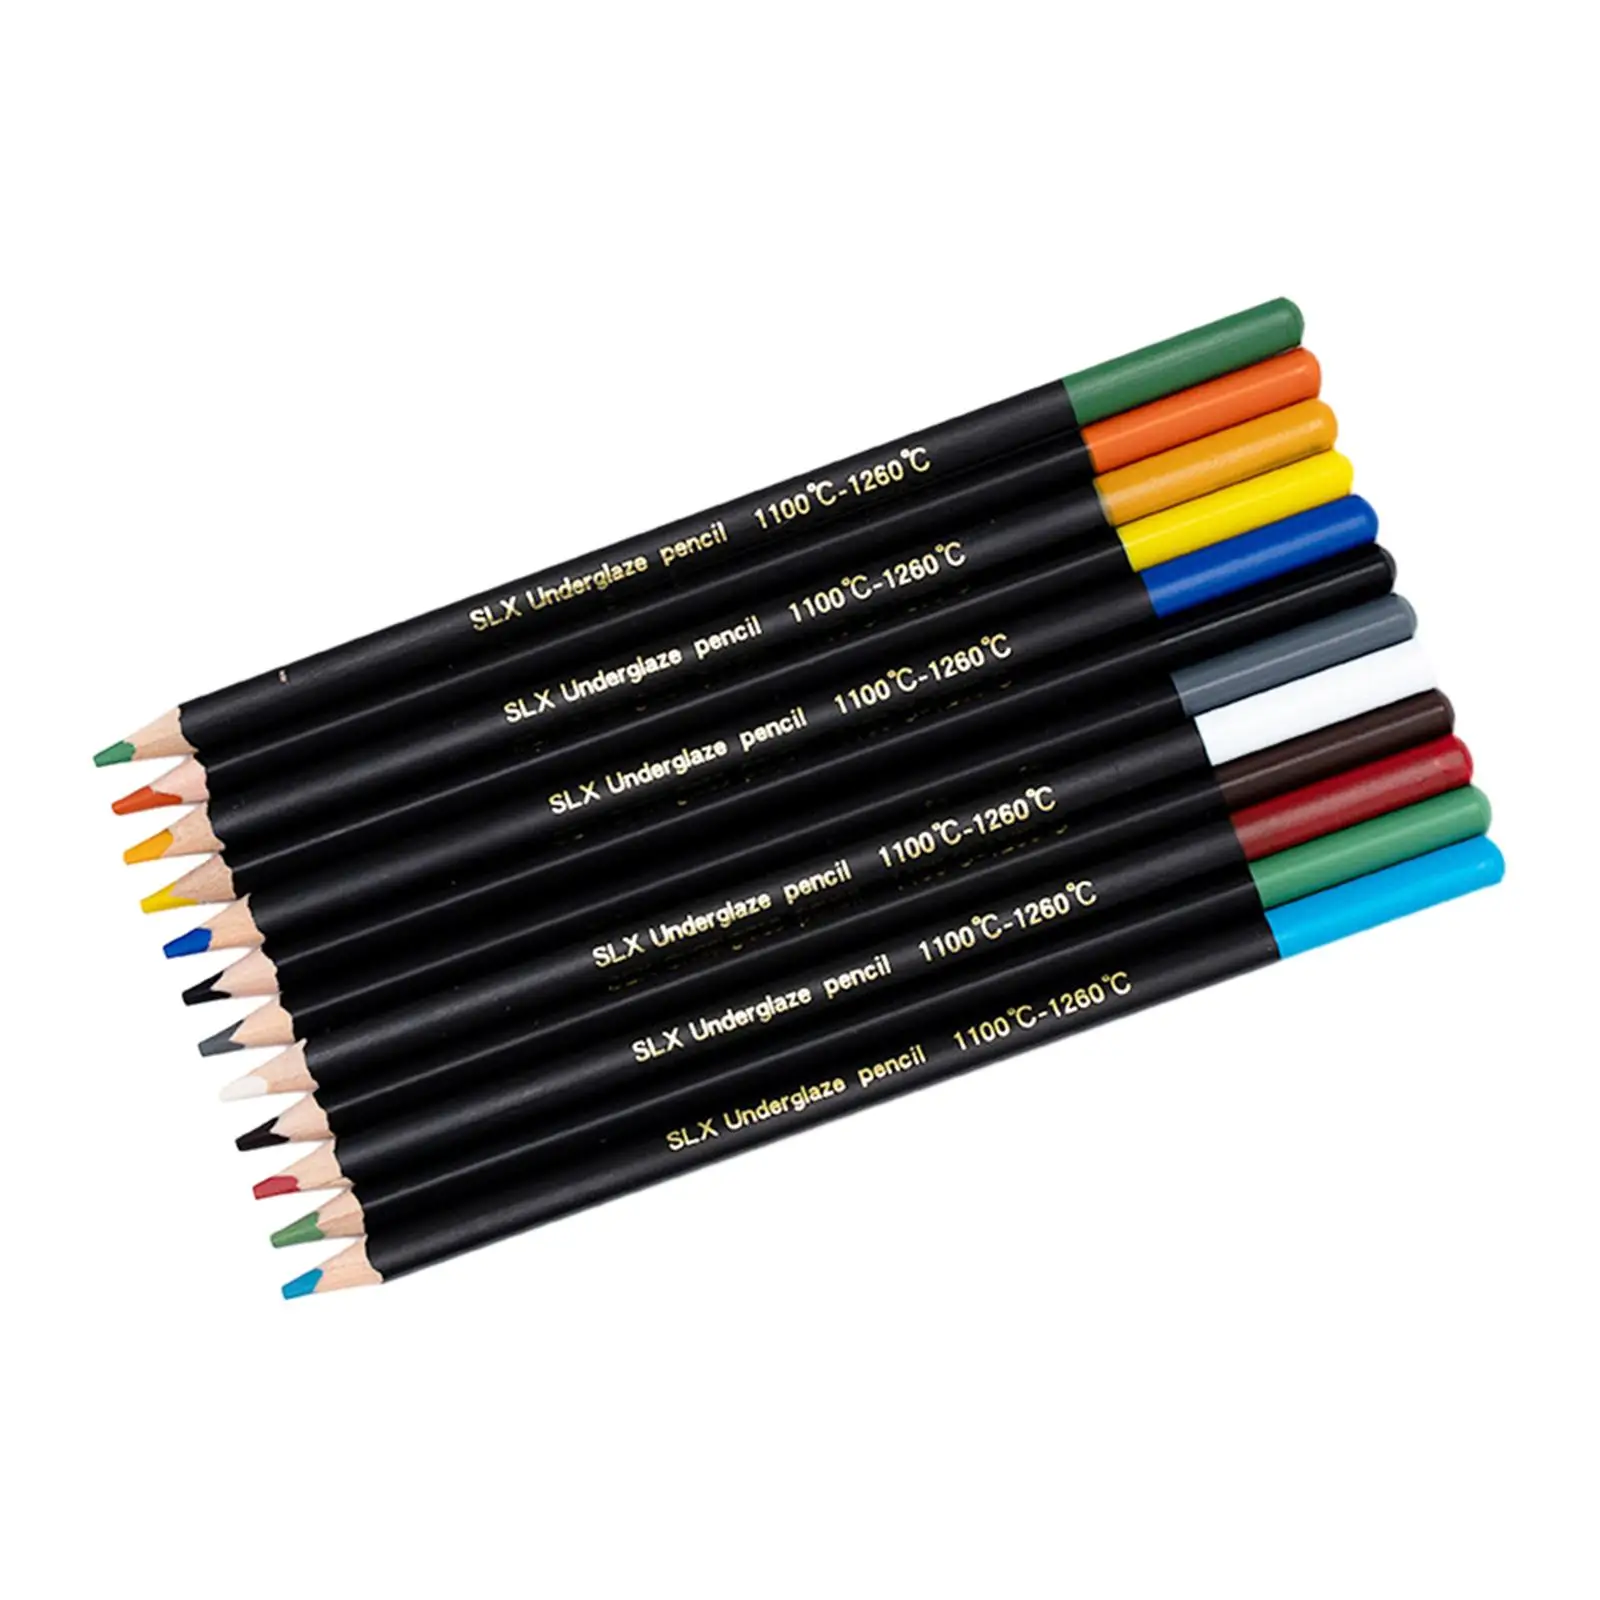 Colored Pencils Professional 12 Count Drawing Pencils Coloring Pencils Set for Coloring Books Art Supplies Artist Shading Gift